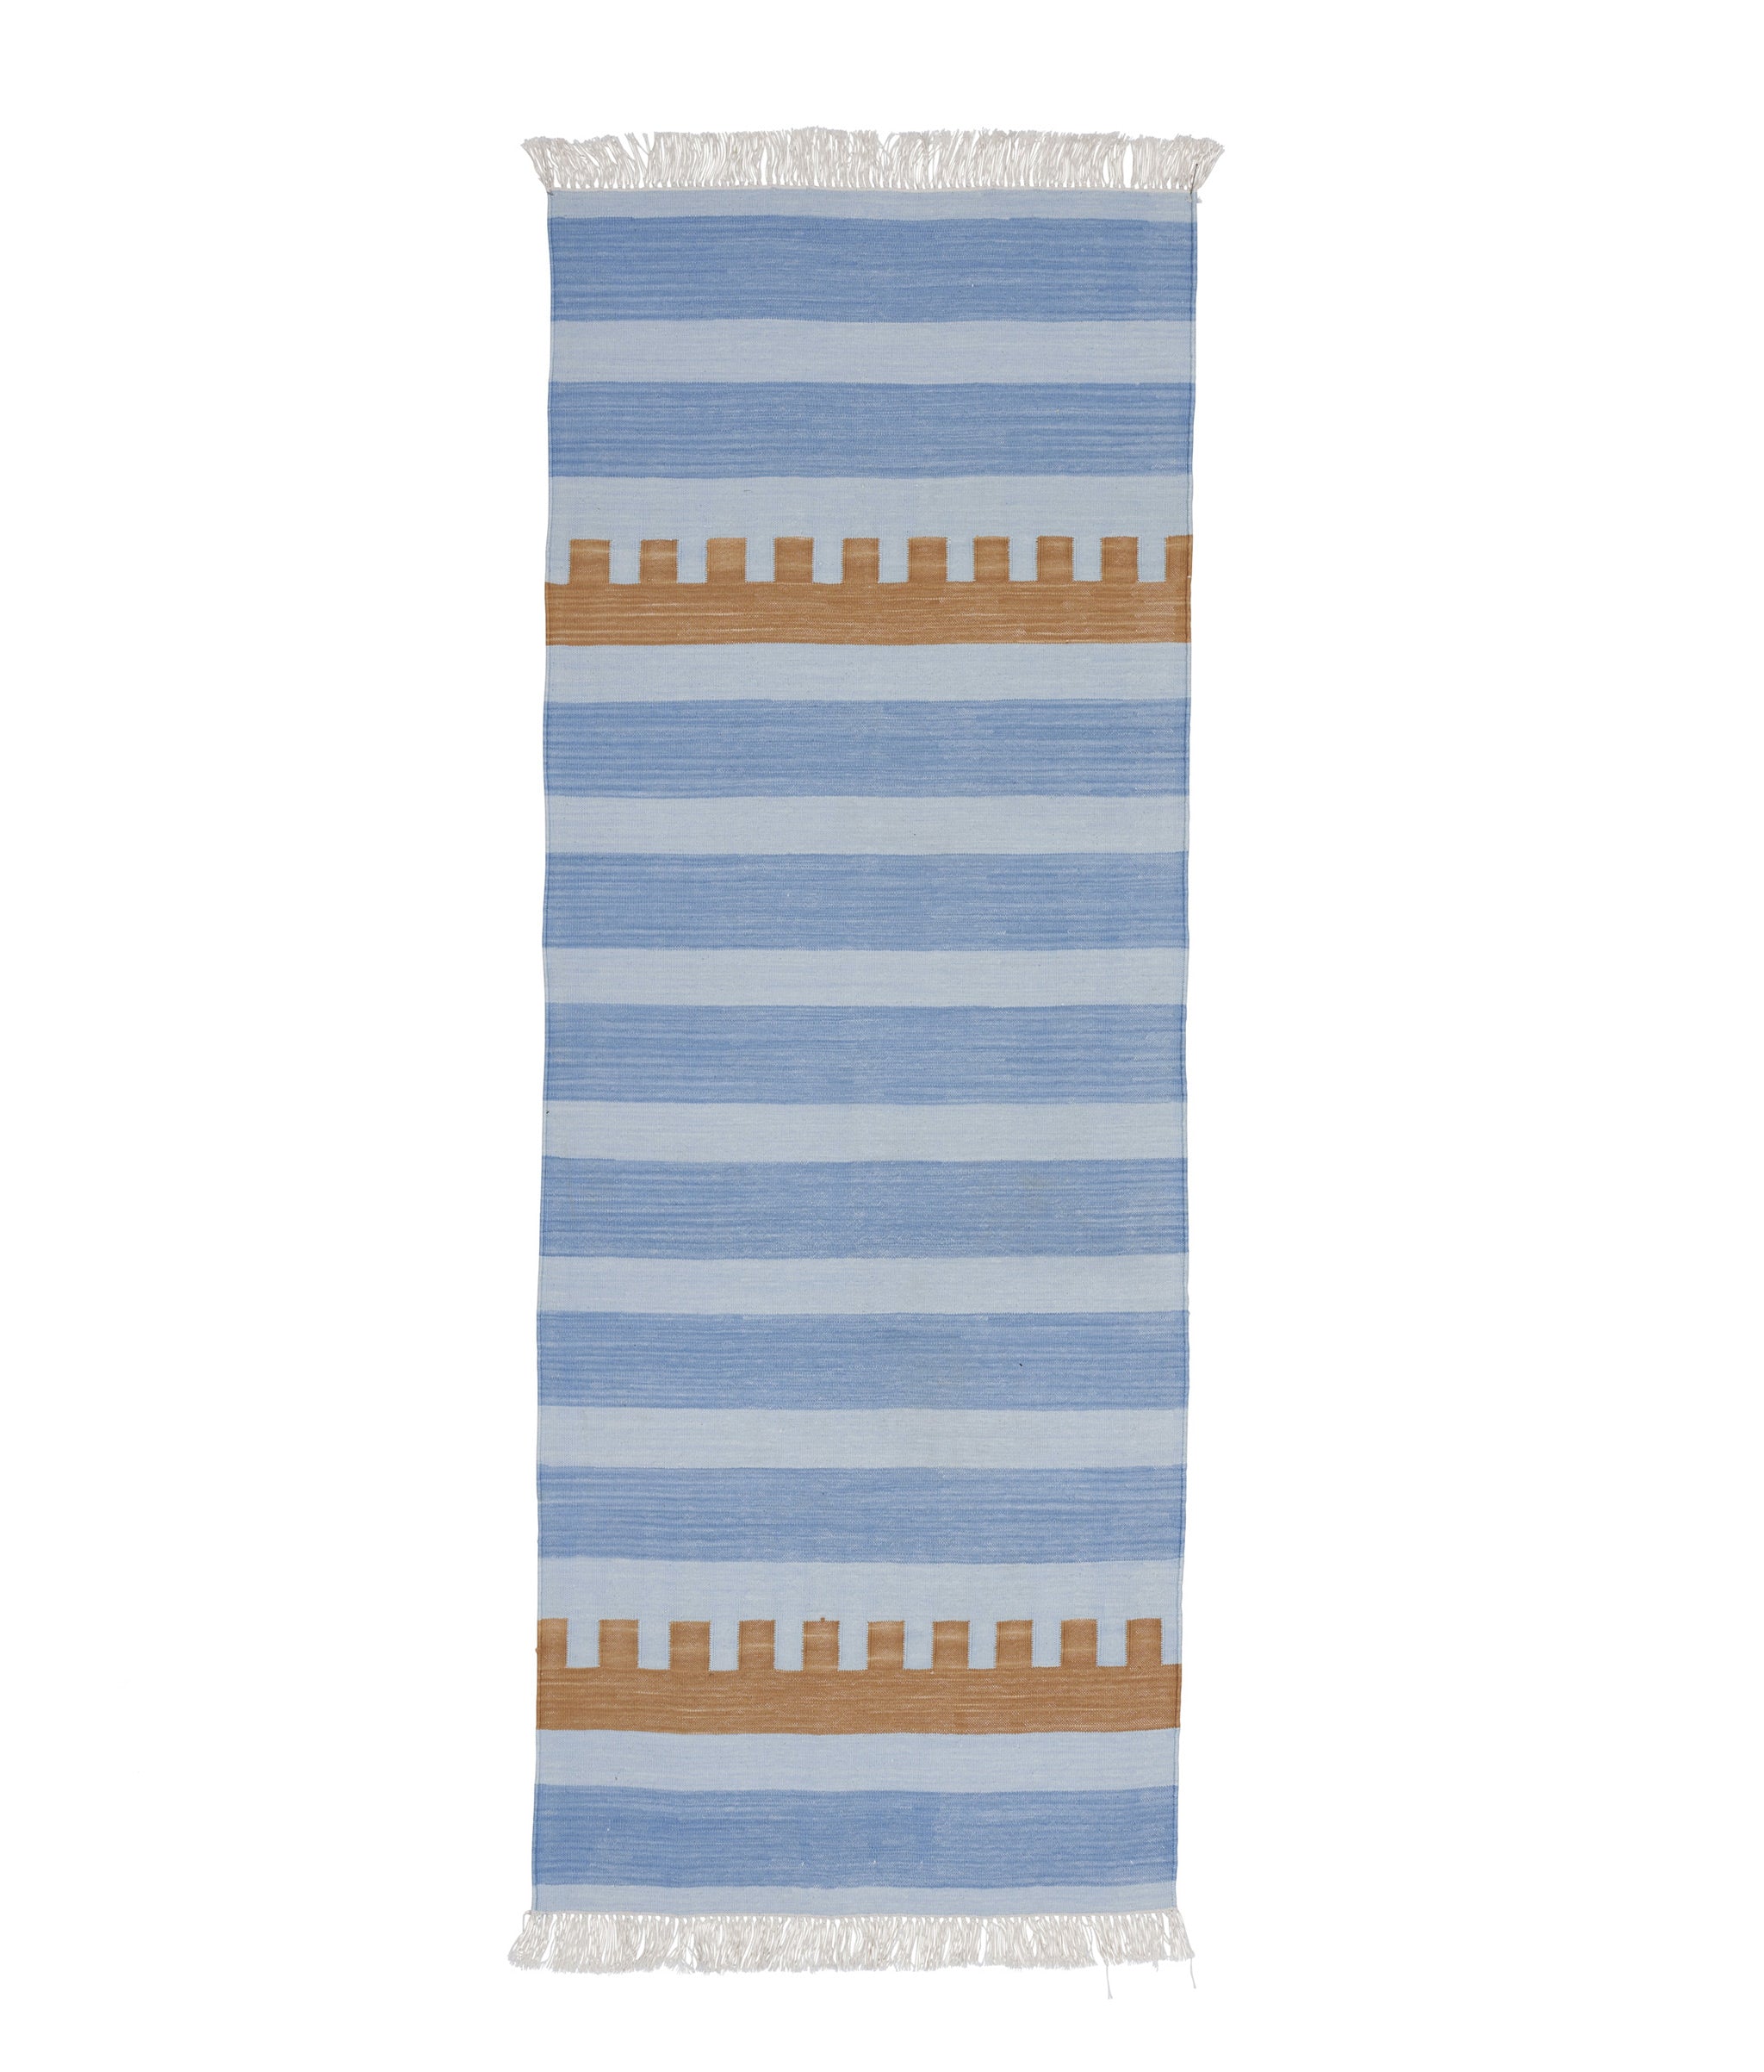 Andes Stripe in Sky Runner. Long rectangular flat weave "dhurrie" rug in two-tone blue stripes with orange stripe accents.